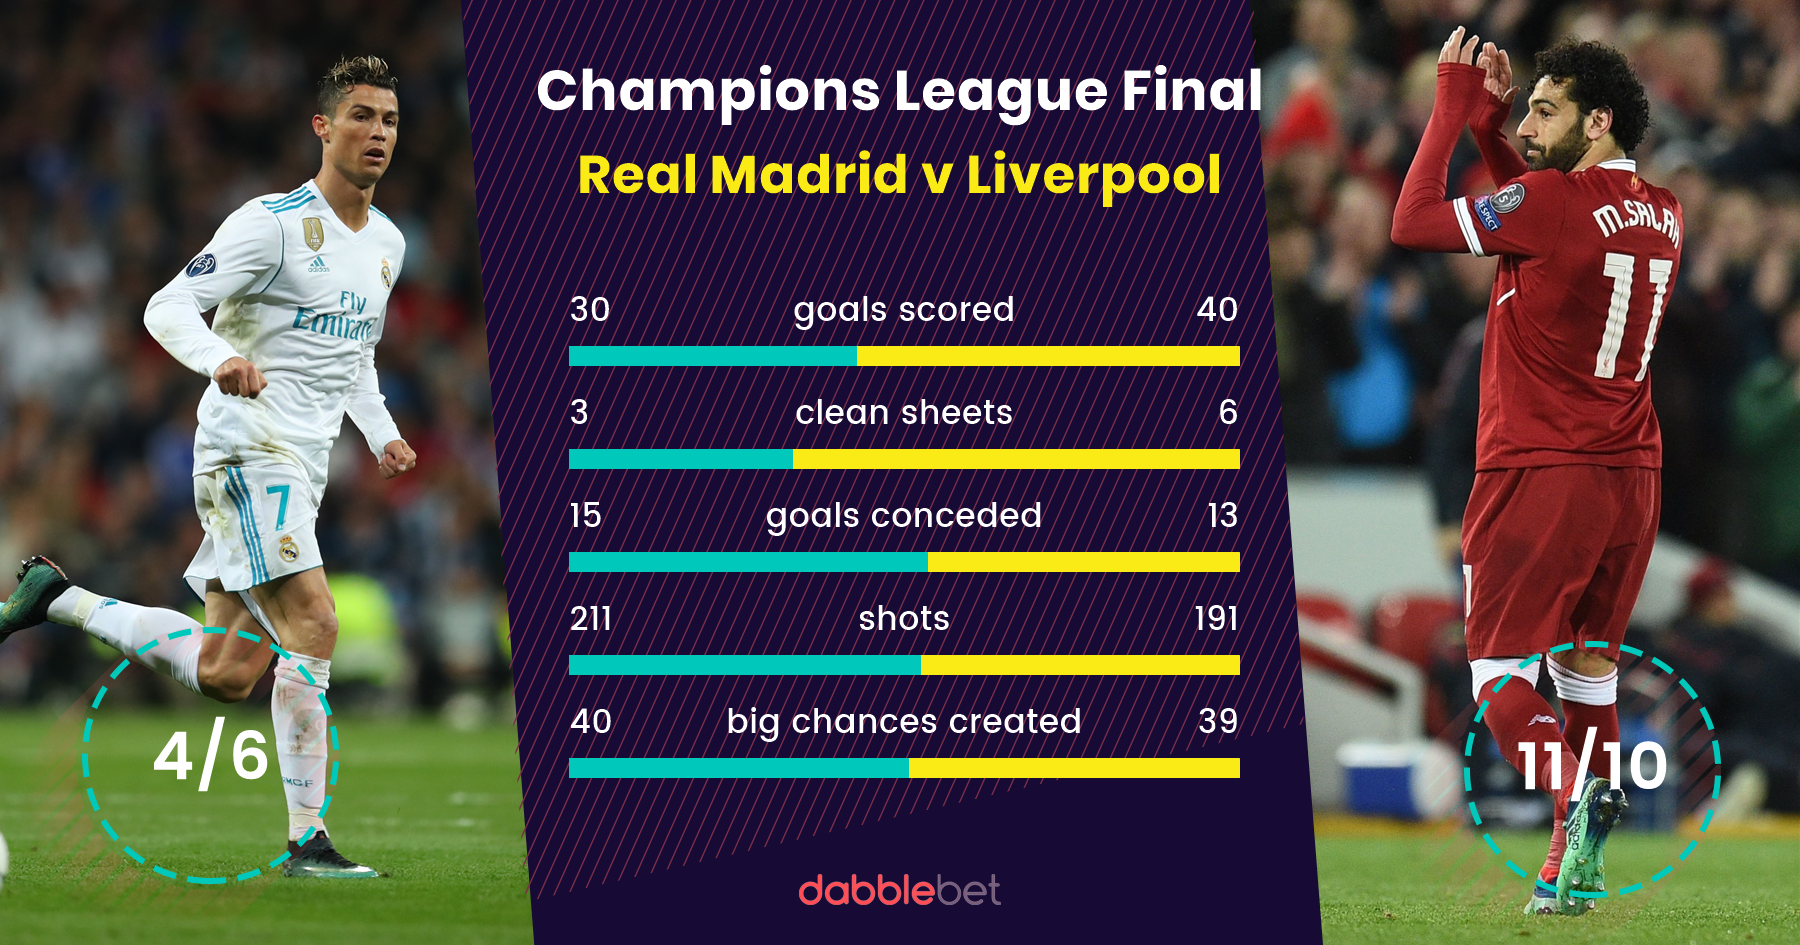 champions league finals last 10 years